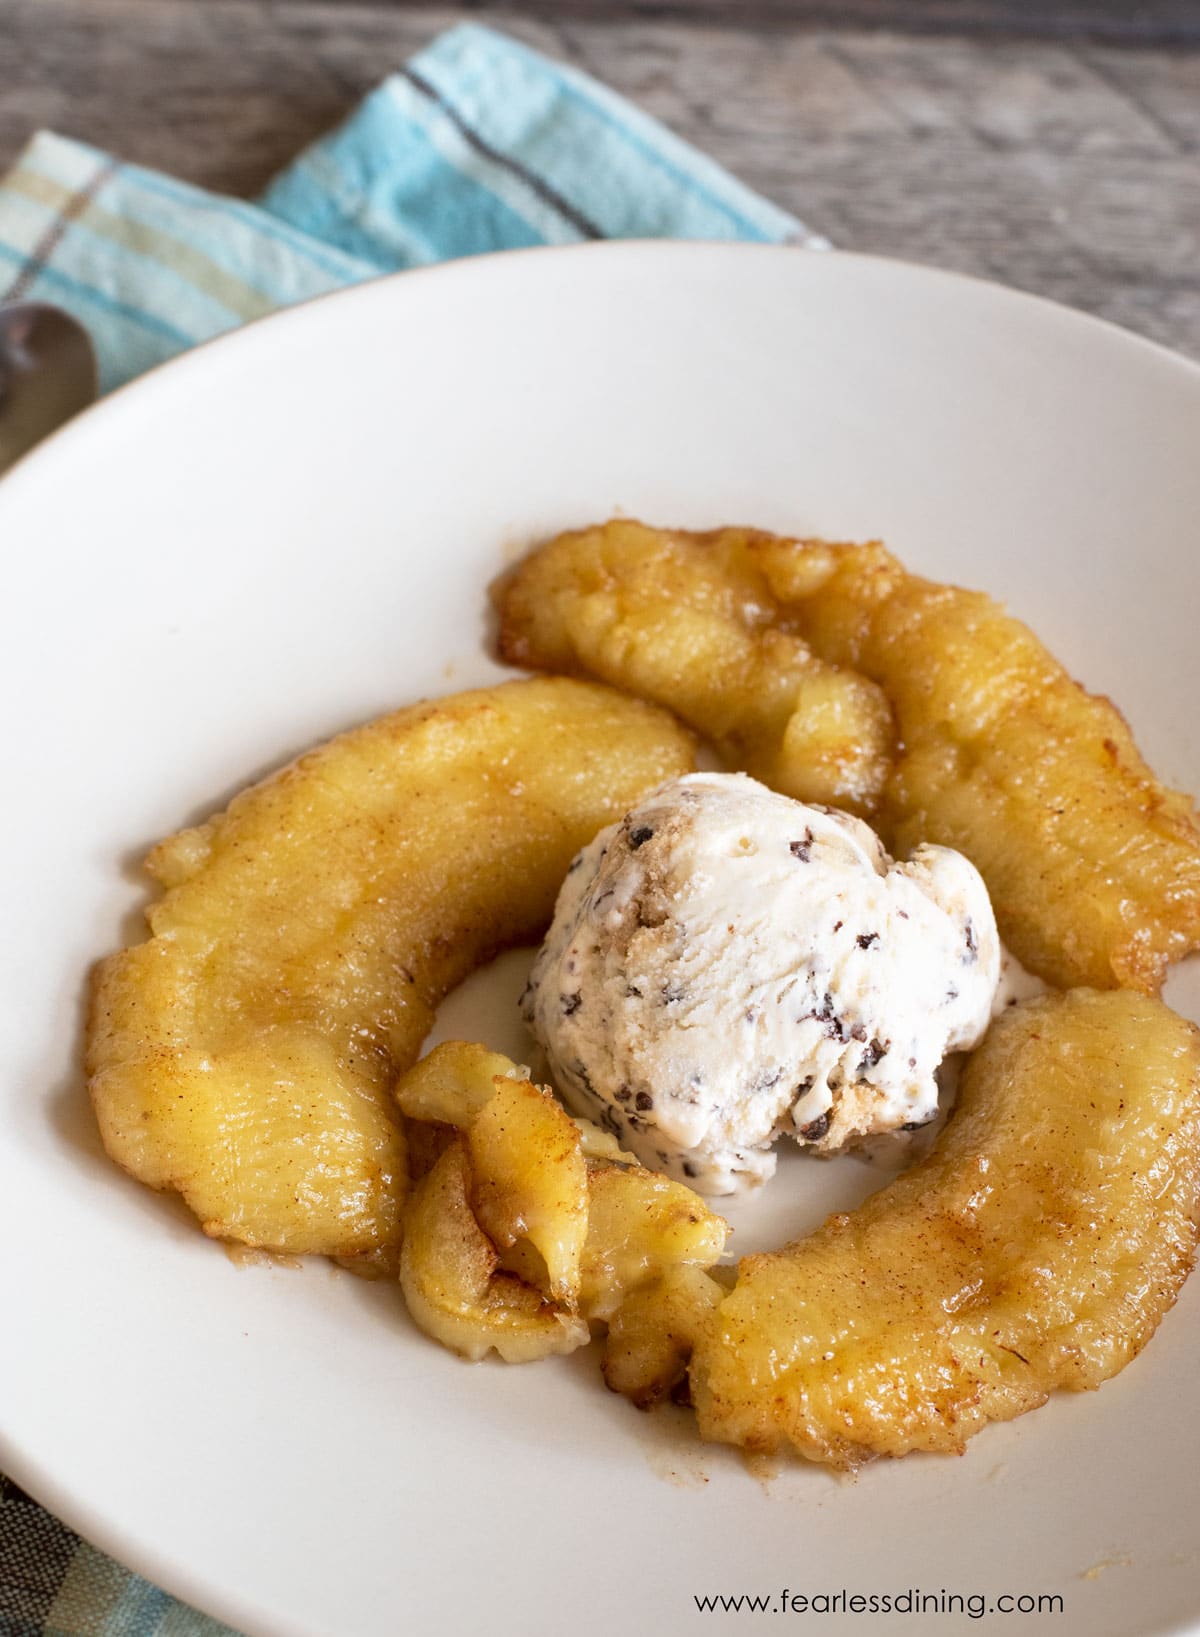 caramelized air fryer banana with a scoop of ice cream.